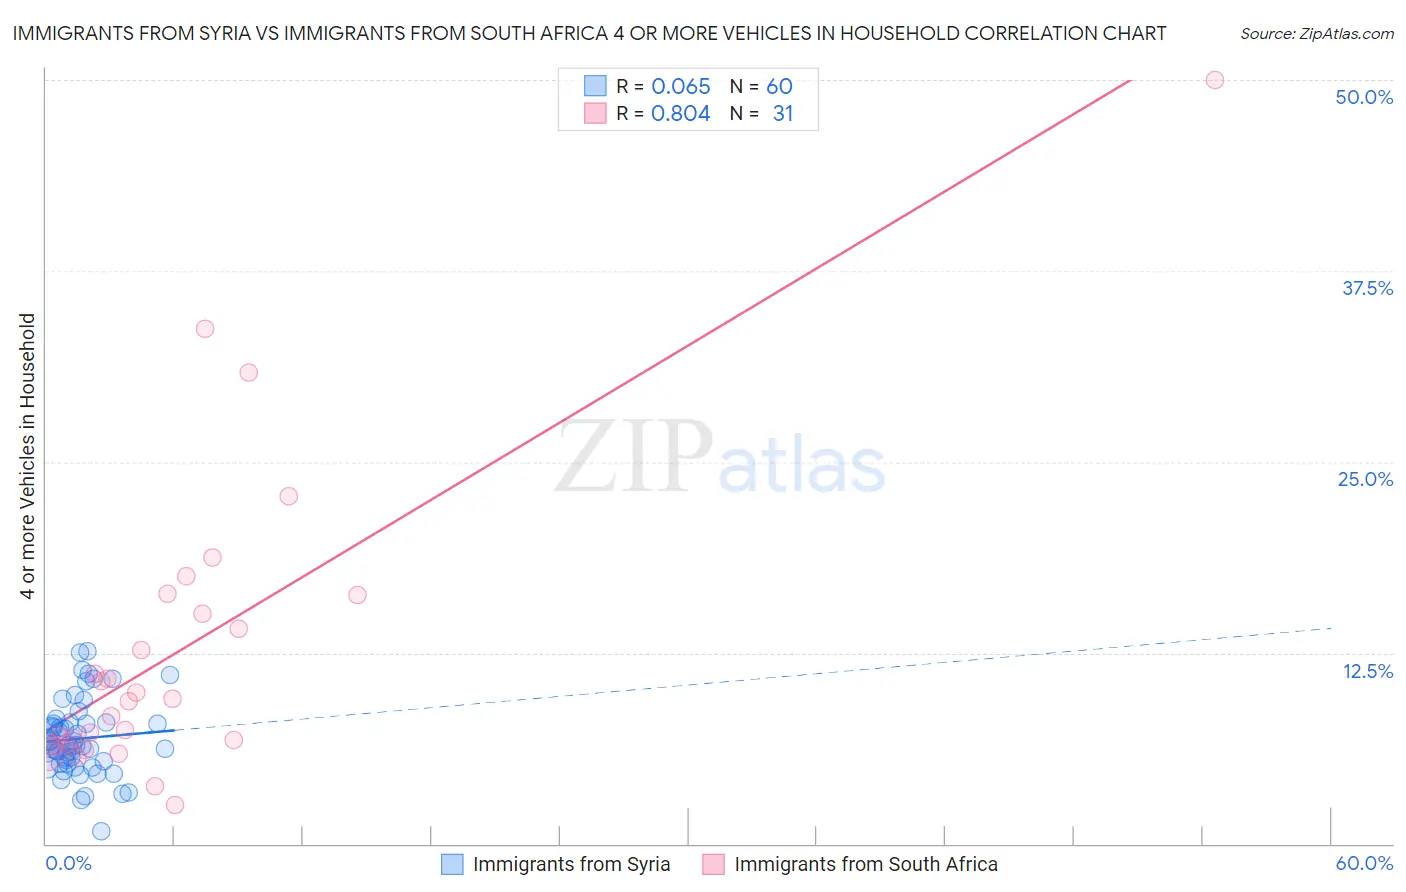 Immigrants from Syria vs Immigrants from South Africa 4 or more Vehicles in Household